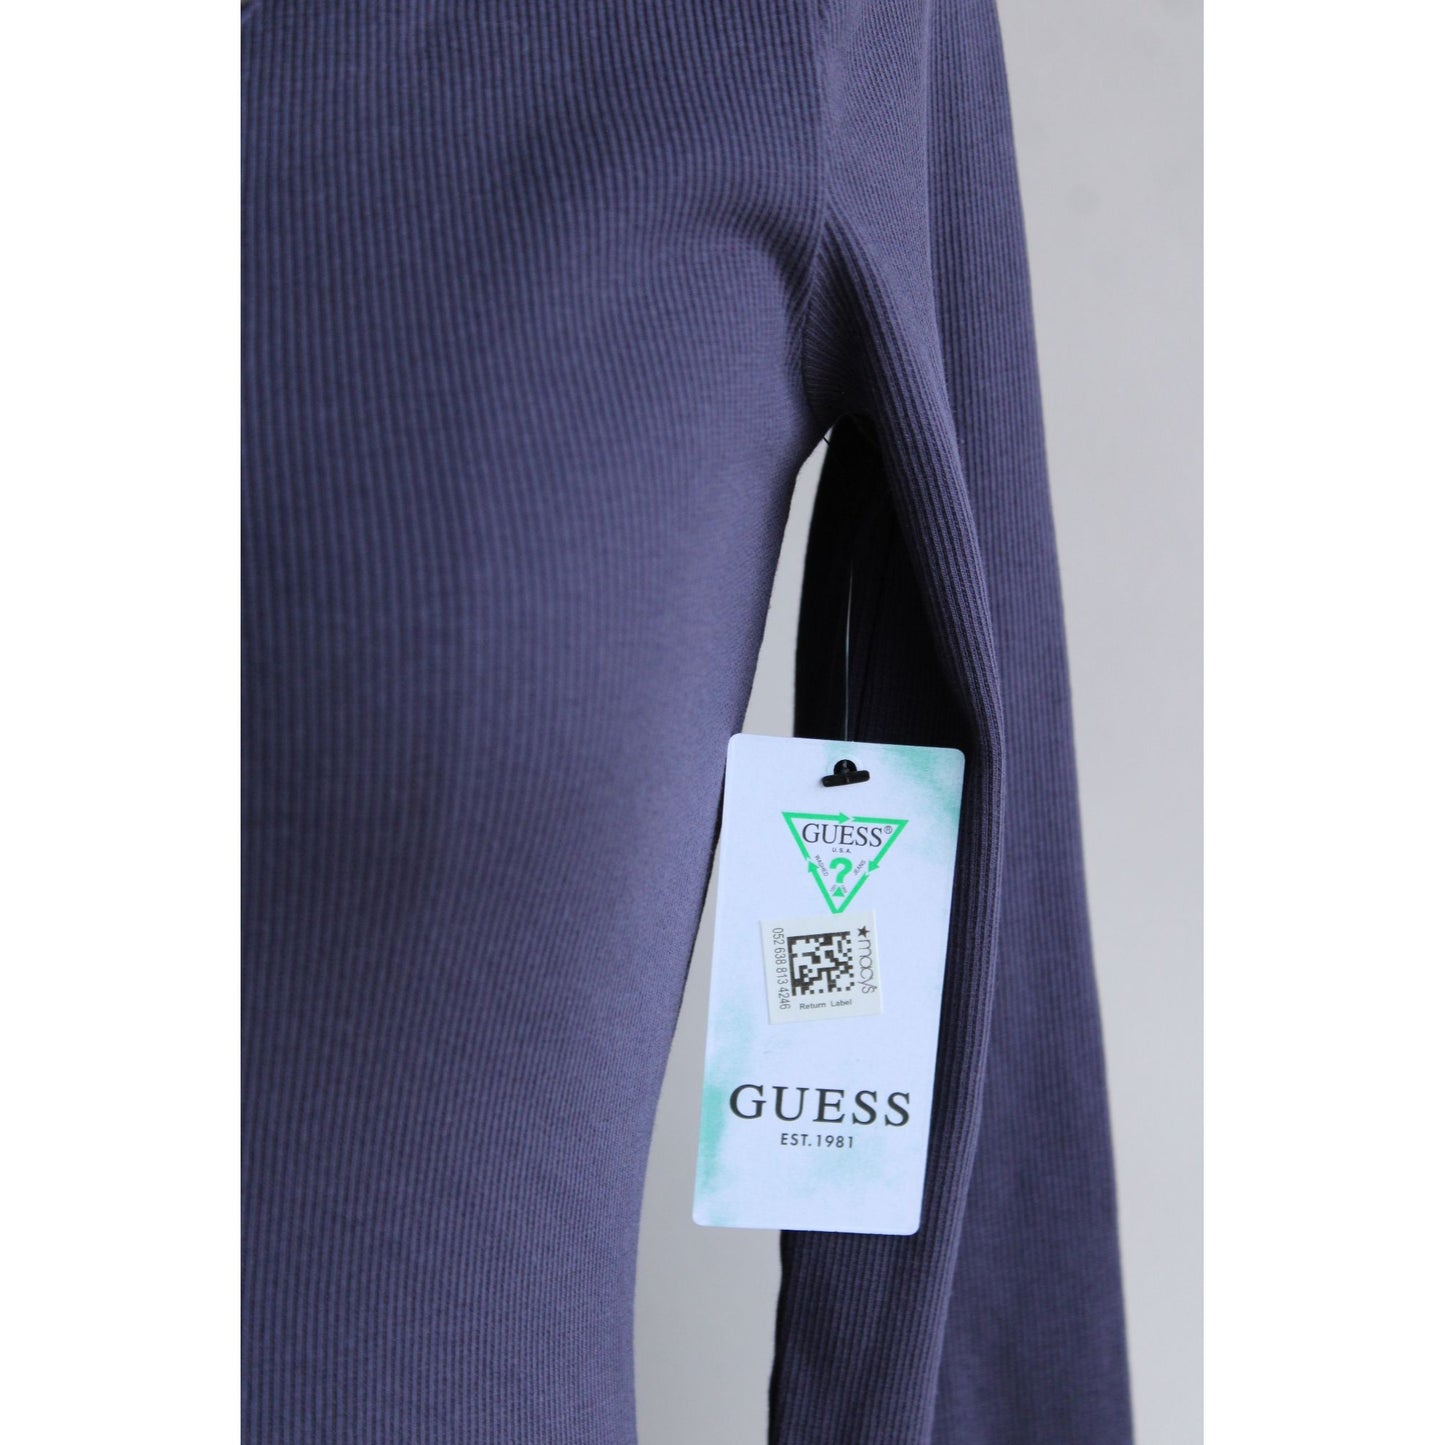 Guess Women's Henly T, New with tag, Size Small, Blue